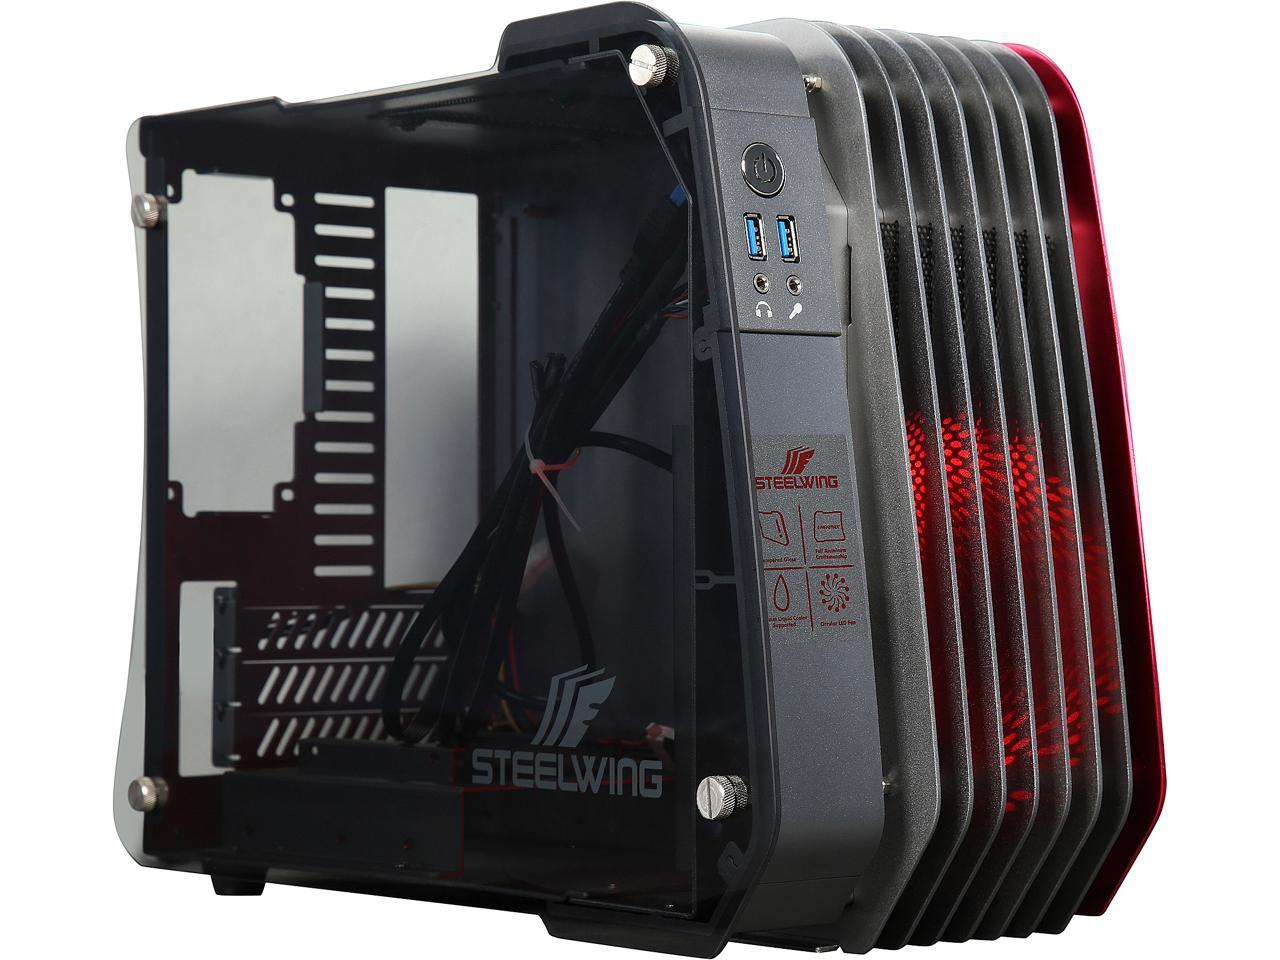 ENERMAX ECB2010R Red Aluminum / Tempered Glass Micro ATX / Mini-ITX Computer Case Standard SFX Type Power Supply-Red - image 1 of 3